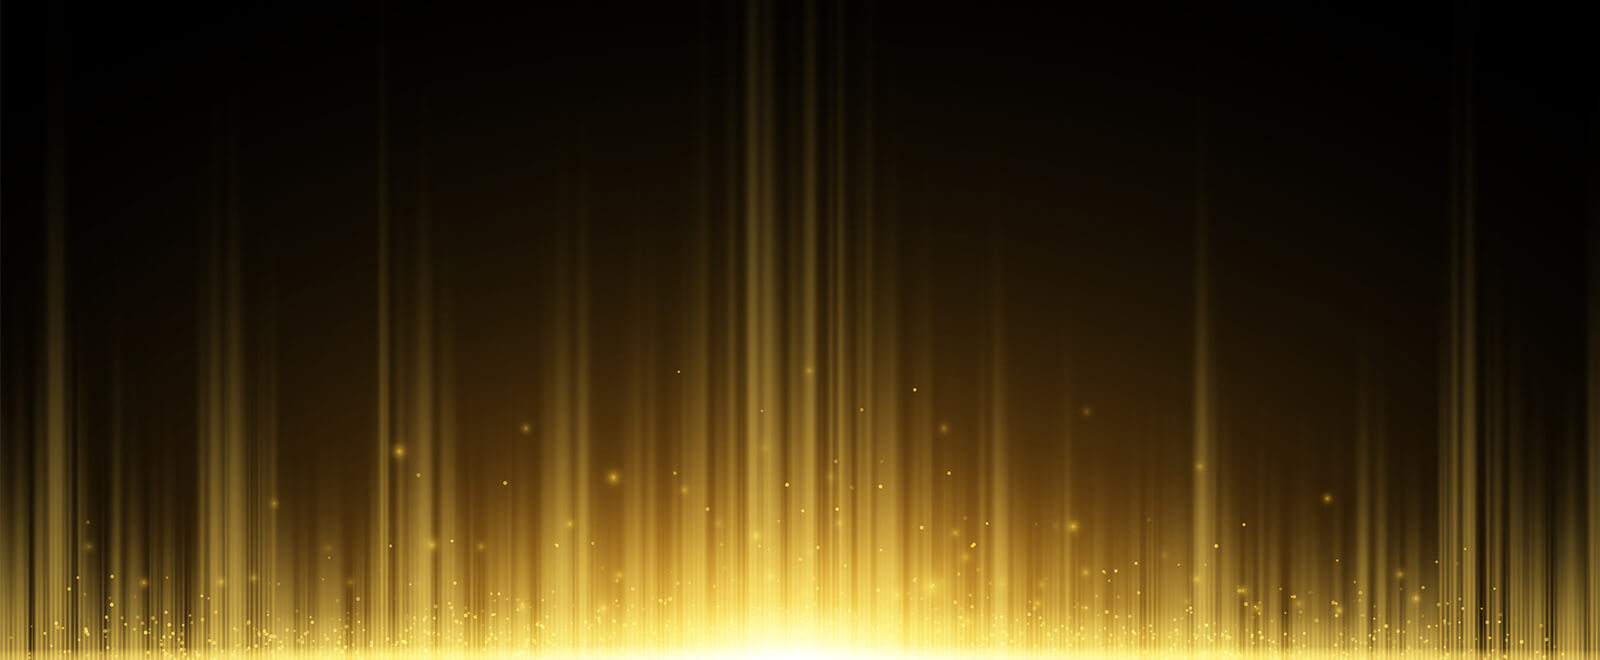 Abstract background simulating a dark gray stage curtain with golden shadows of light at the bottom